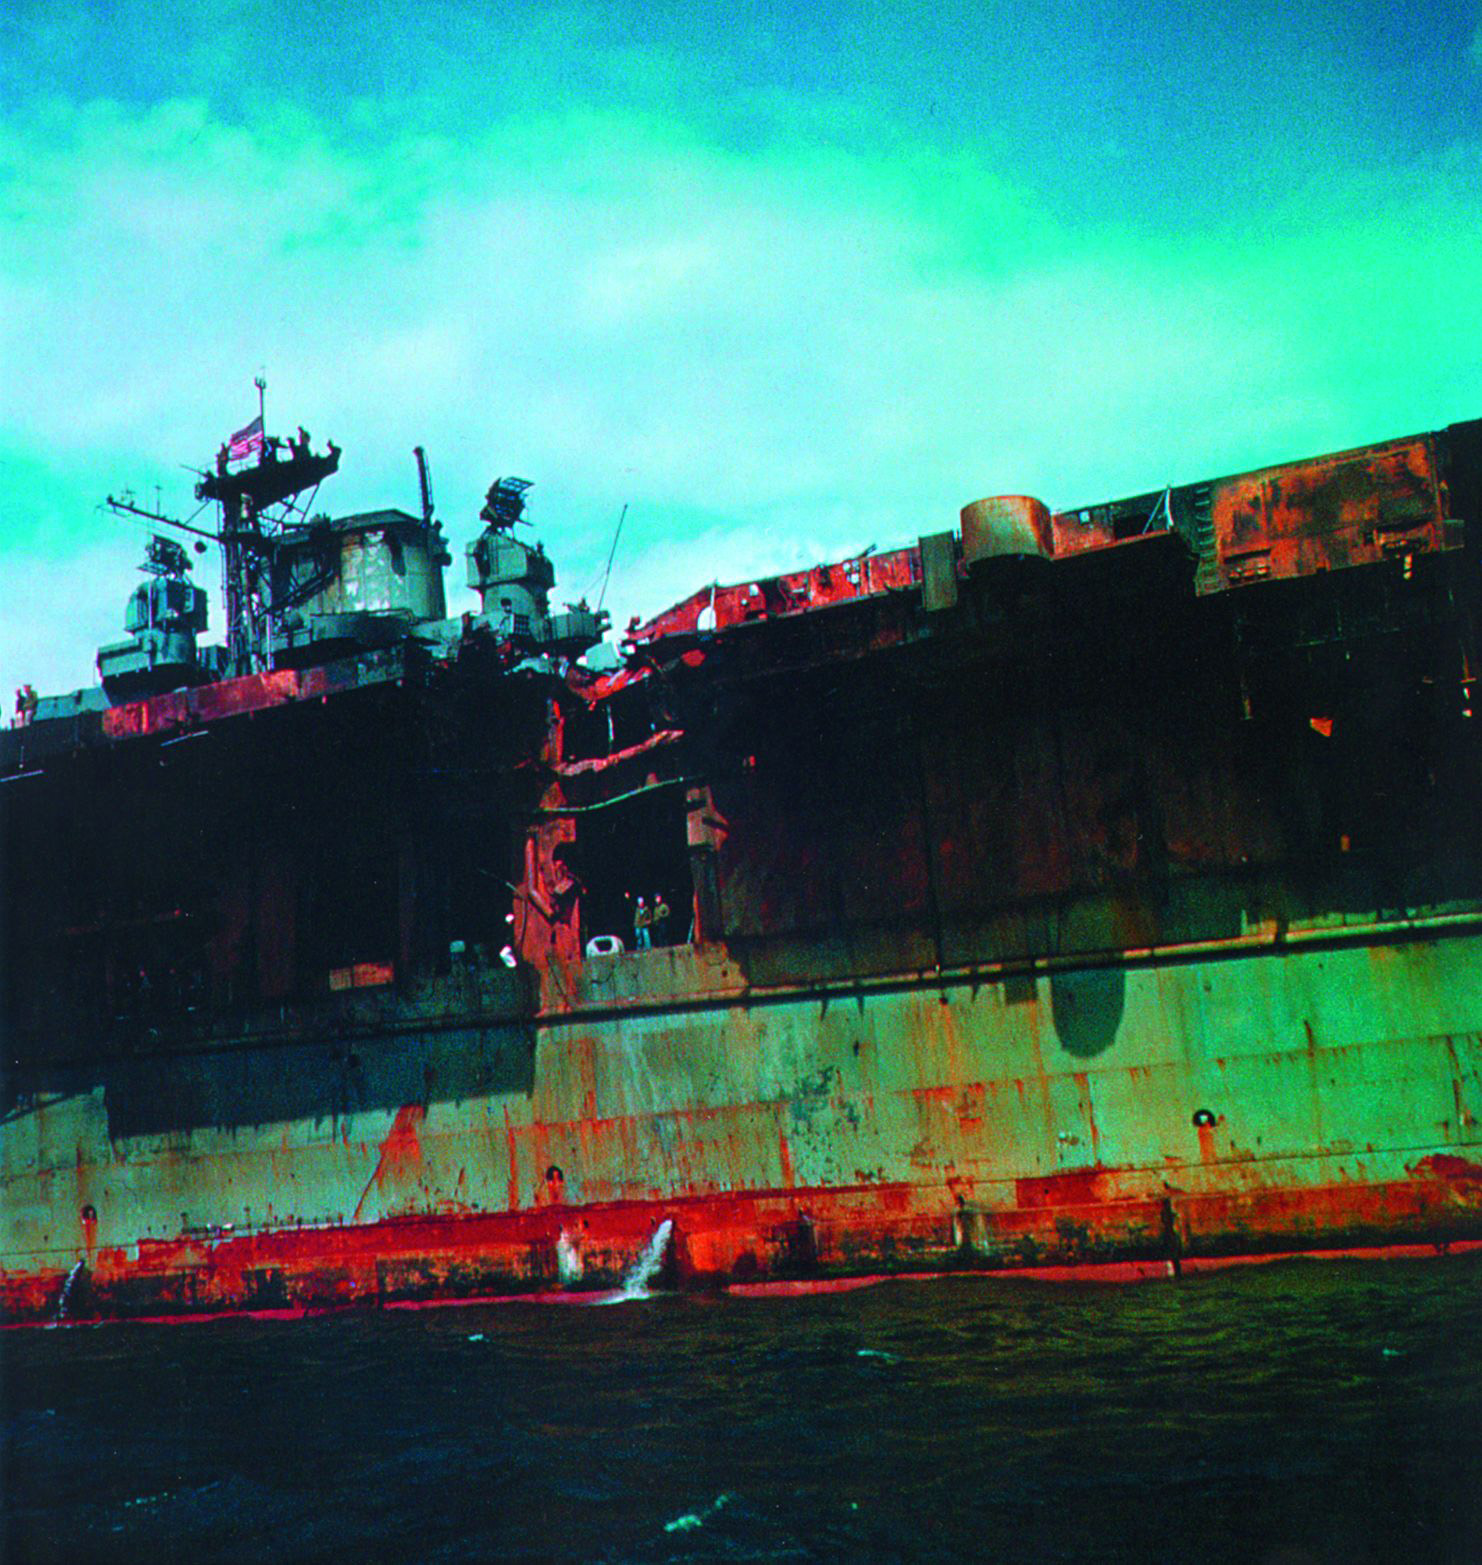 The extent of the damage suffered by the Franklin is evidenced by the rust and peeling paint on the vessel’s hull, which resulted from the intense heat generated by the shipboard fires.